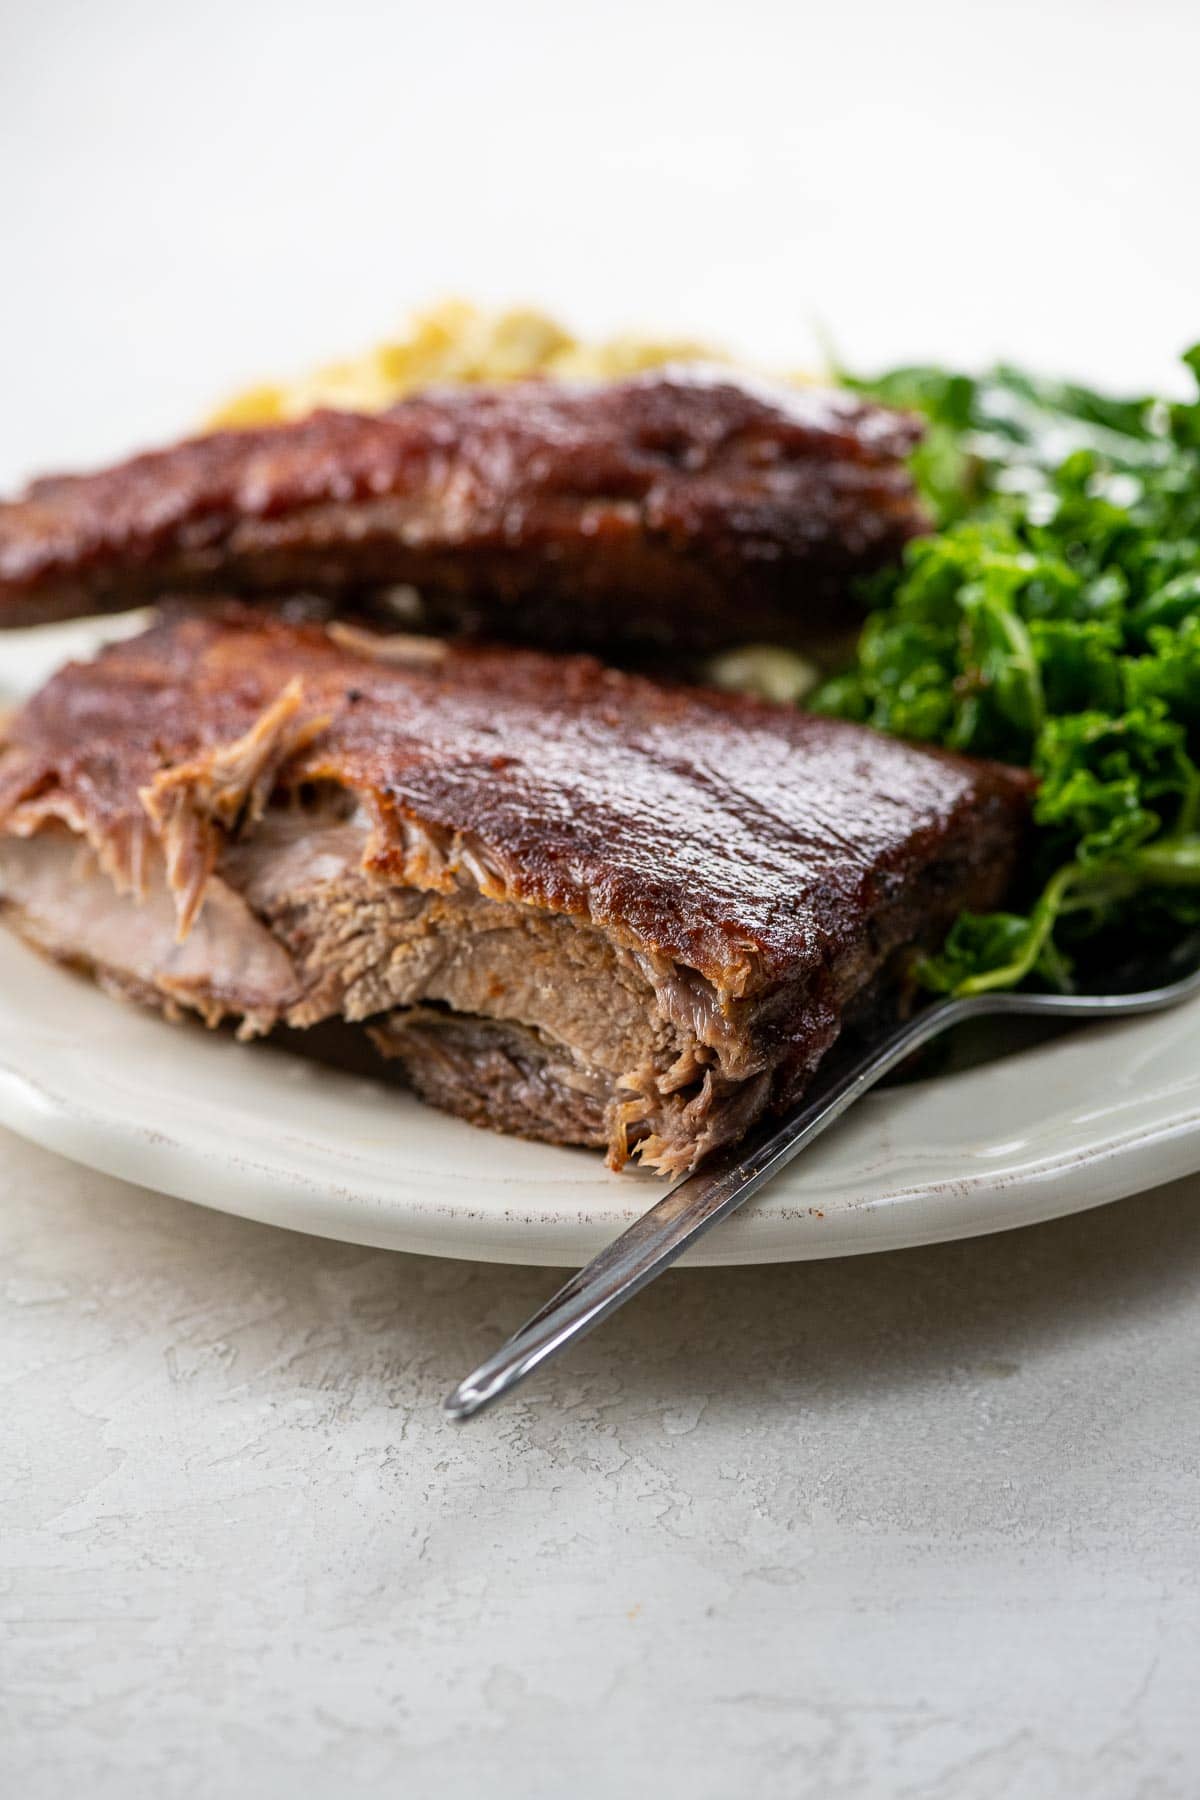 St. Louis ribs, kale salad, and macaroni and cheese on a plate